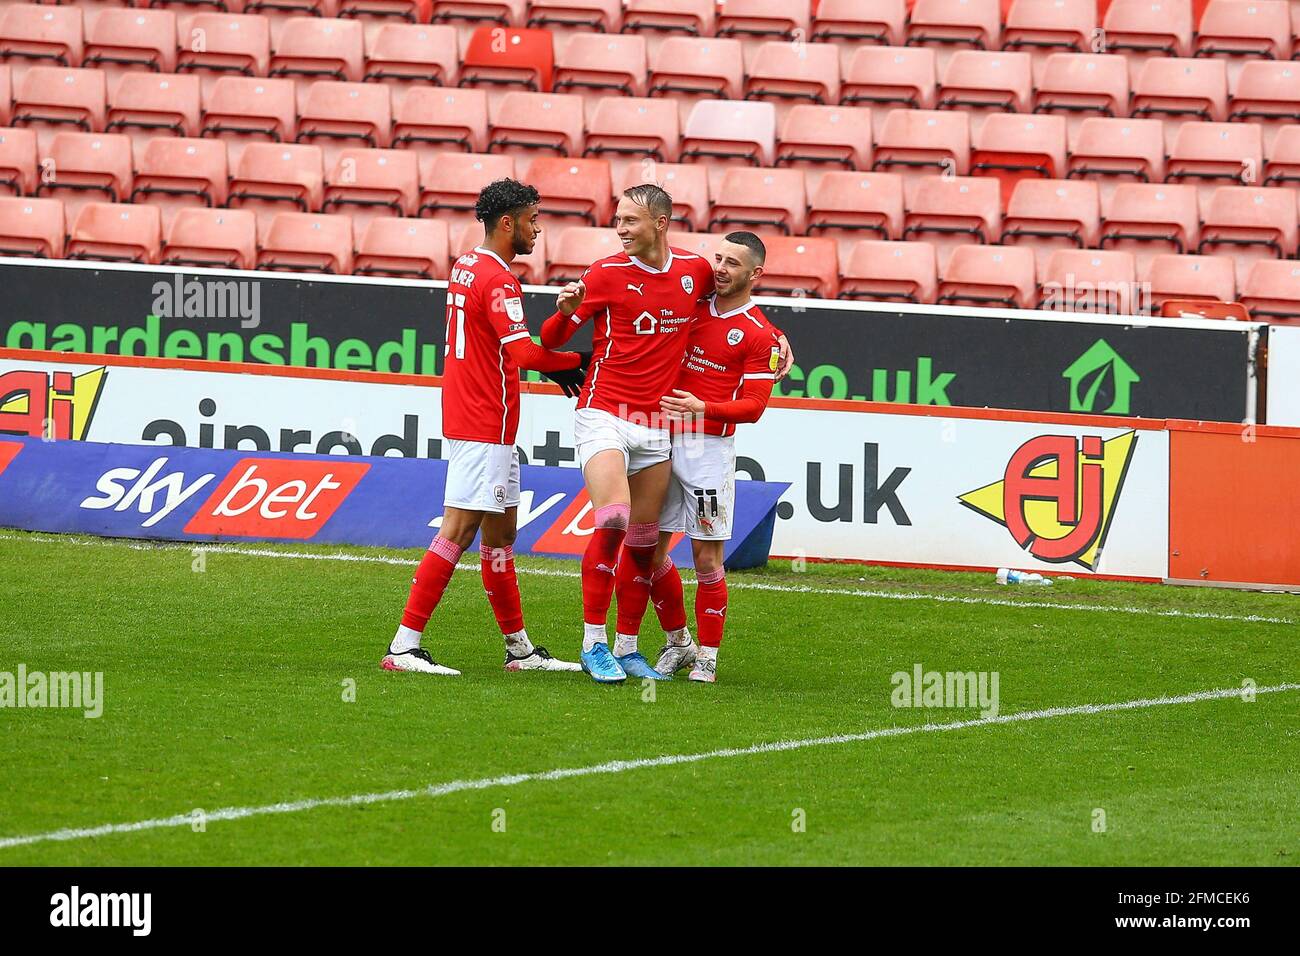 Oakwell, Barnsley, England - 8th May 2021 Conor Chaplin (11) of Barnsley after he scores to make it 2 - 1 during the game Barnsley v Norwich City, Sky Bet EFL Championship 2020/21, at Oakwell, Barnsley, England - 8th May 2021 Credit:  Arthur Haigh/WhiteRosePhotos/Alamy Live News                                        Oakwell, Barnsley, England - 8th May 2021  during the game Barnsley v Norwich City, Sky Bet EFL Championship 2020/21, at Oakwell, Barnsley, England - 8th May 2021 Credit:  Arthur Haigh/WhiteRosePhotos/Alamy Live News Stock Photo